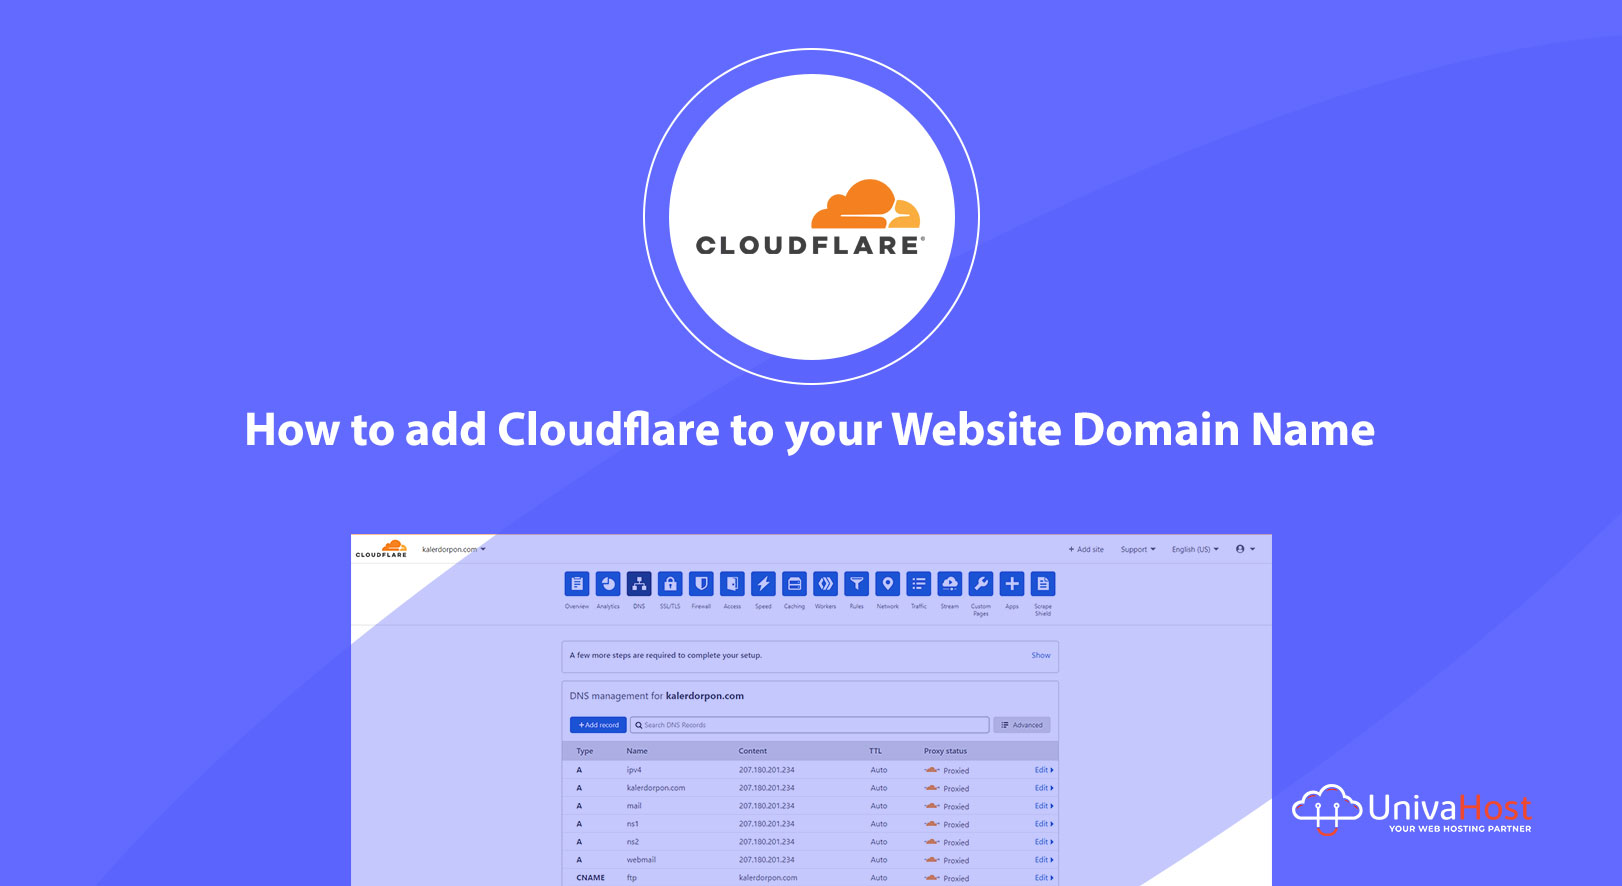 How To Add Cloudflare To Your Website Domain Name